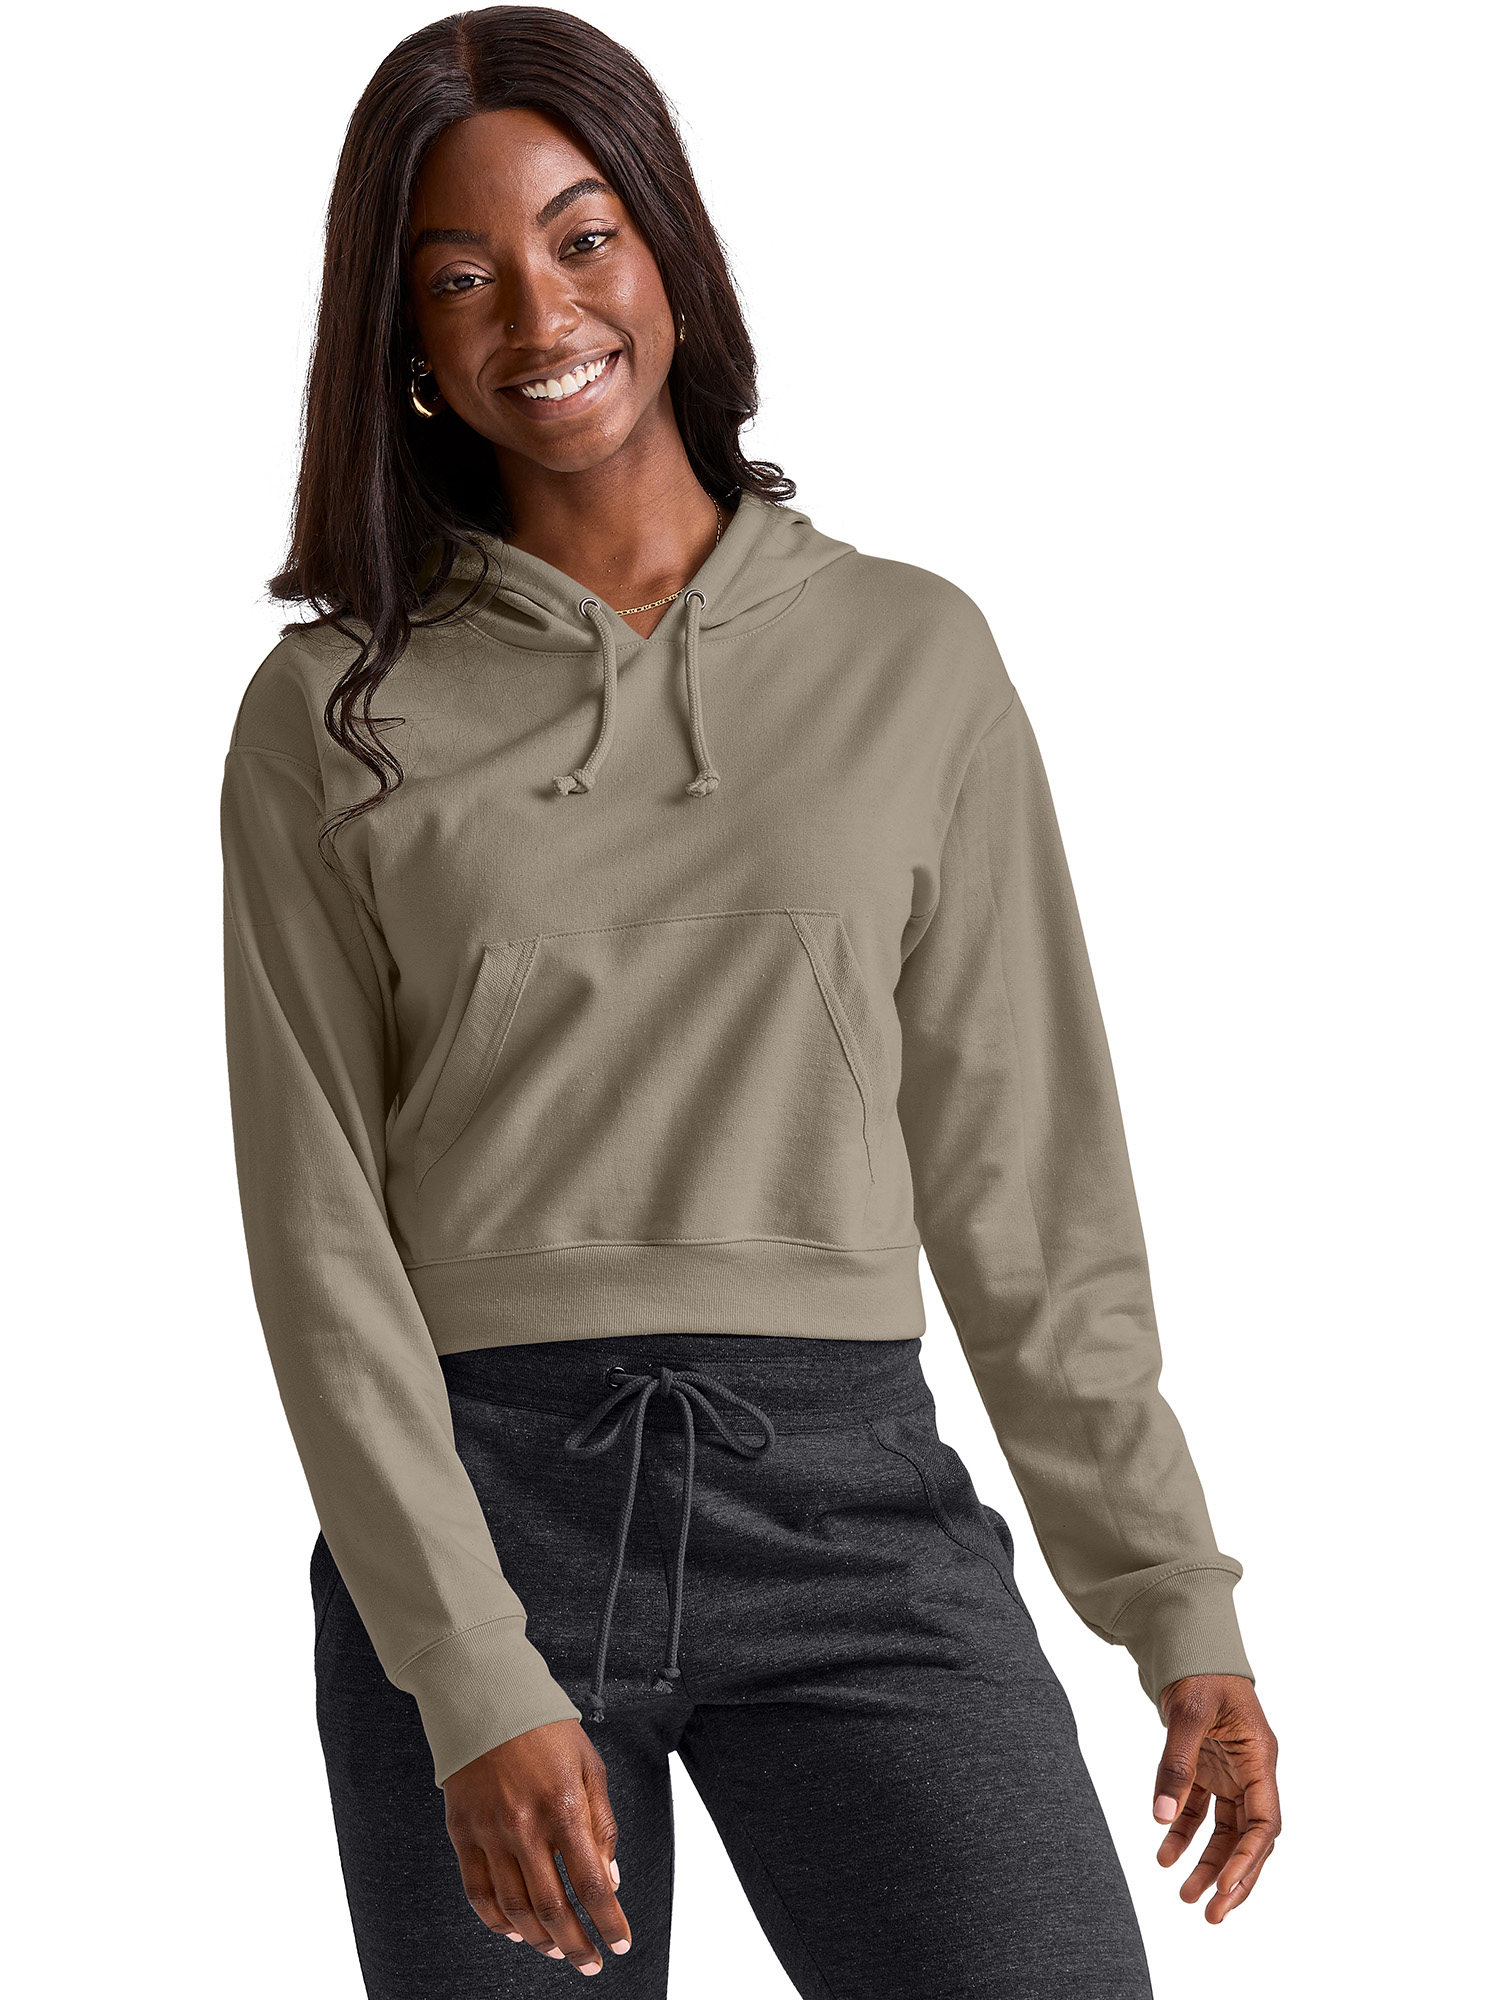 Hanes Originals Women's French Terry Cropped Hoodie, Sizes XS-XXL ...